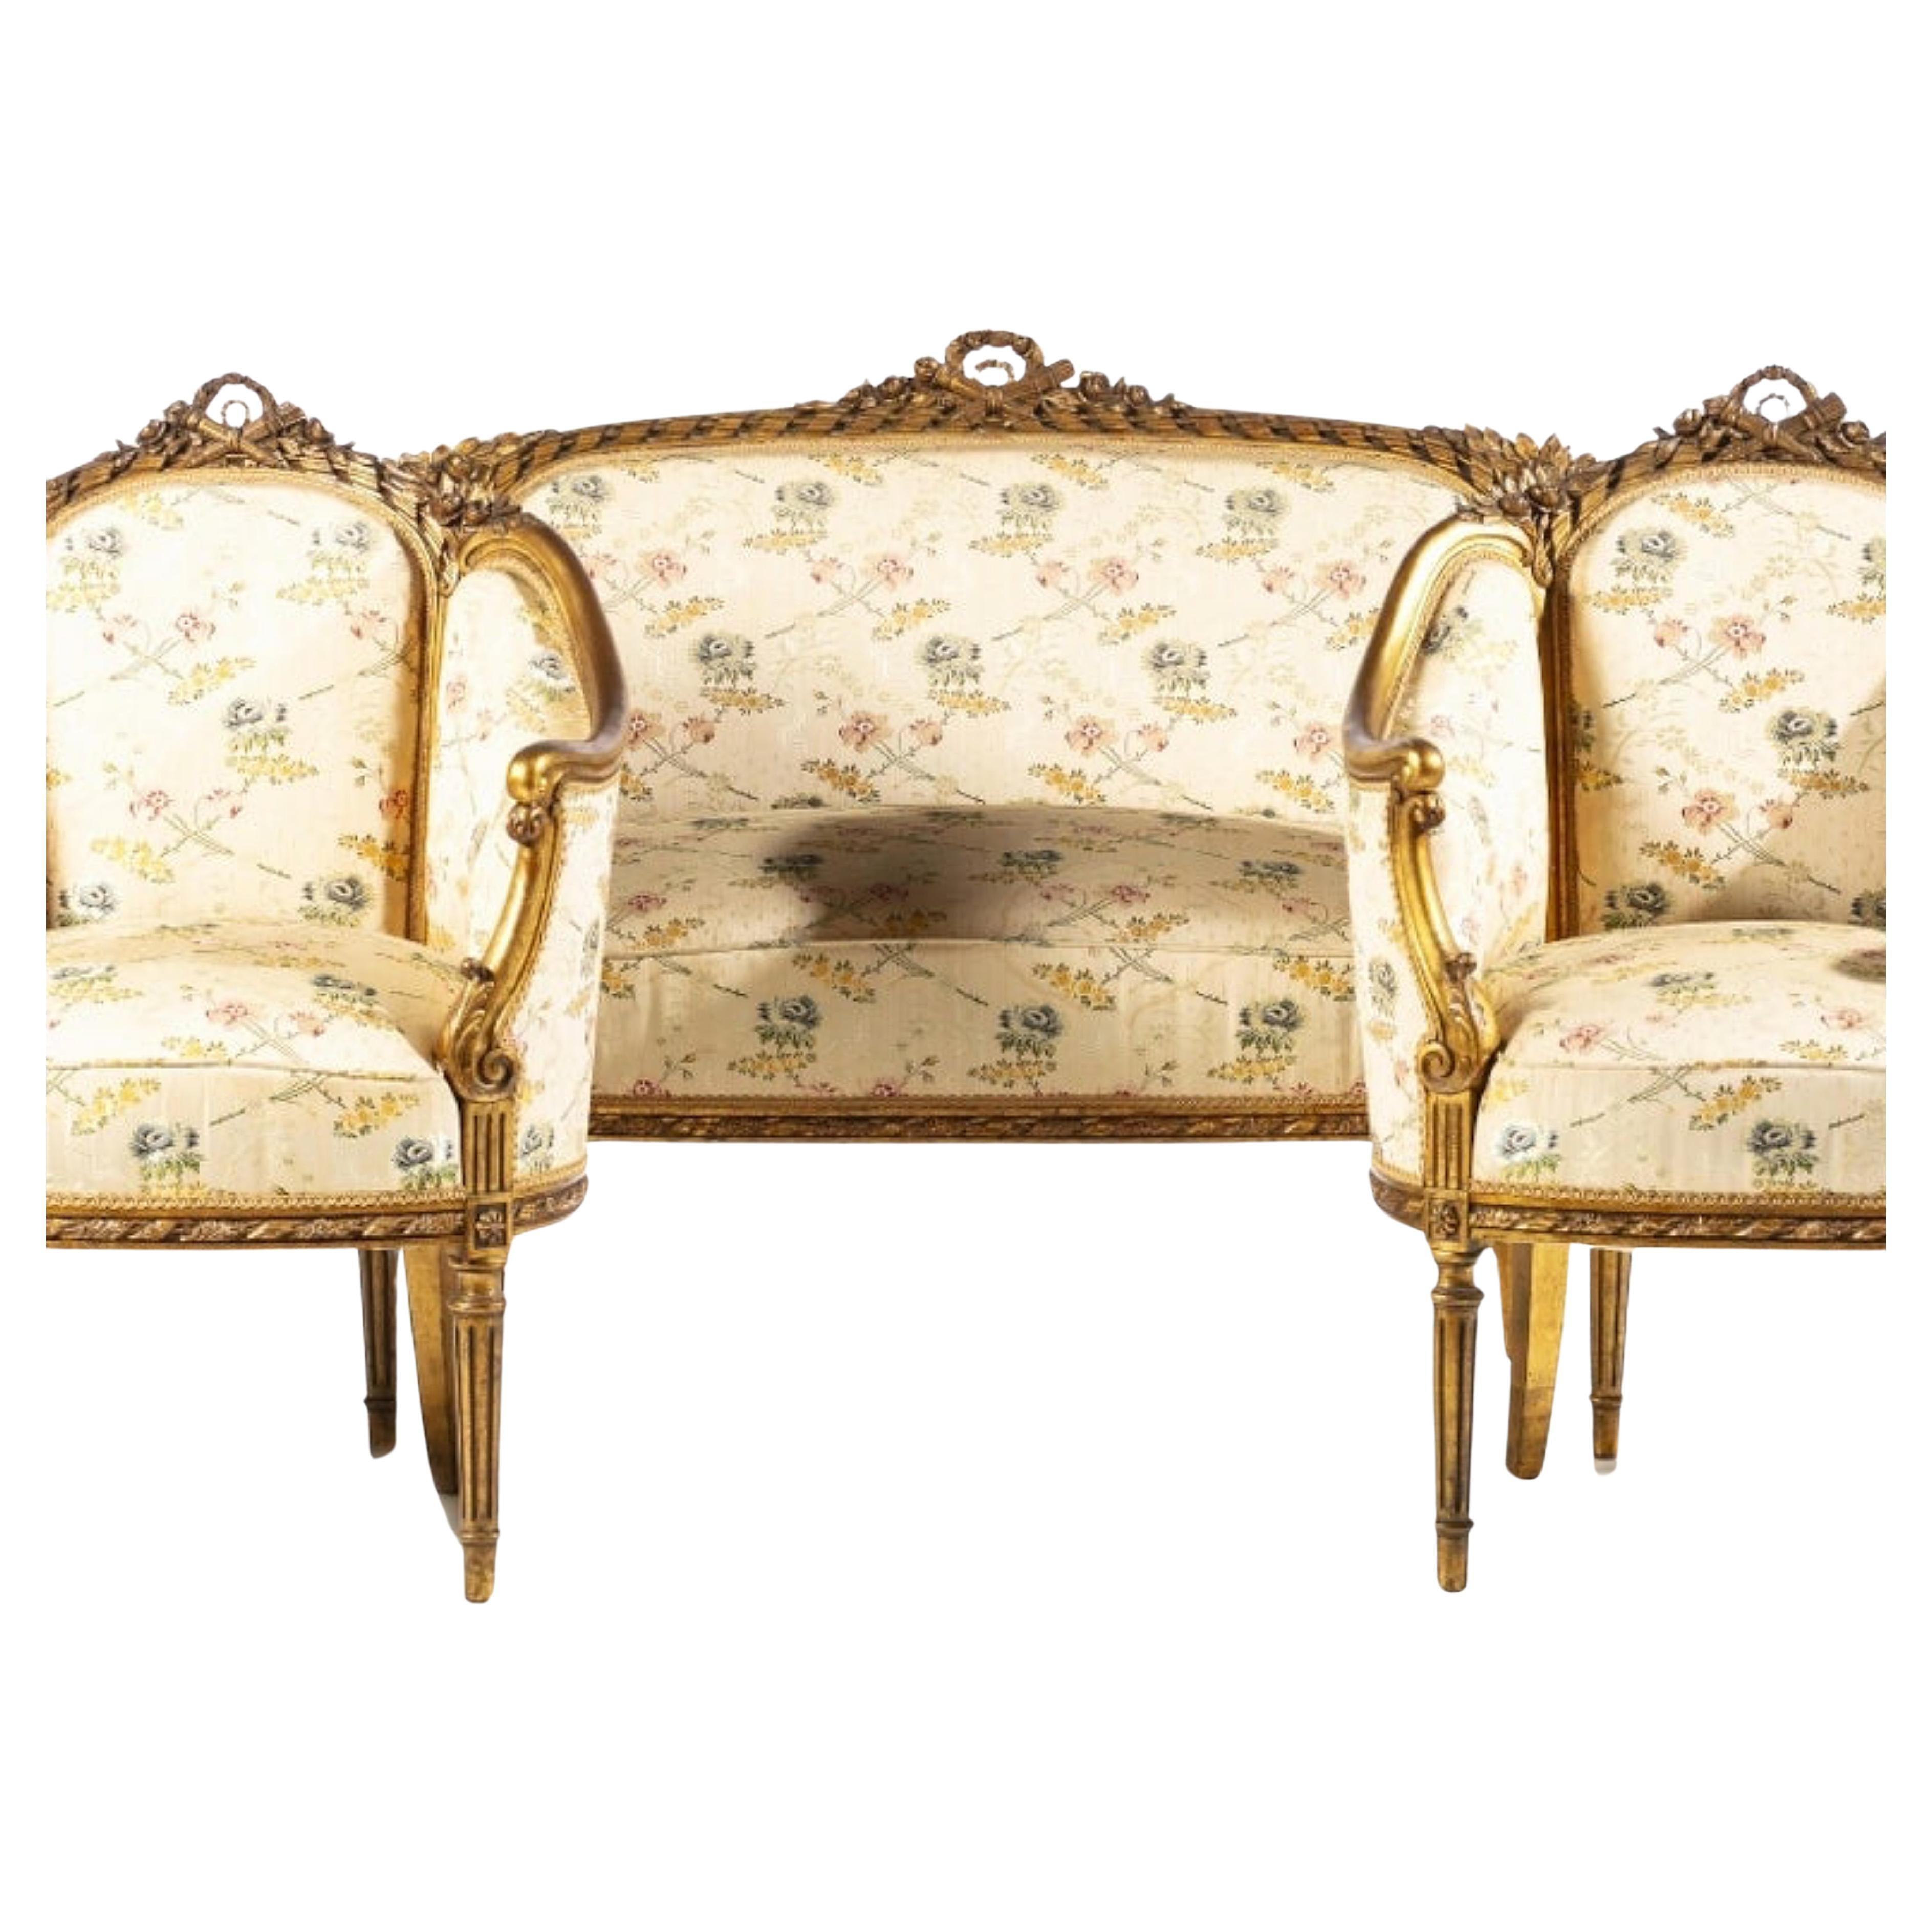 19th/20th Century FRENCH SET AND PAIR OF ARMCHAIRS

in gilded and carved wood.
Upholstered seats and back.
Dim.: (canapé) 94 x 145 x 55 cm;
(chair) 100 x 70 x 55 cm.
good conditions